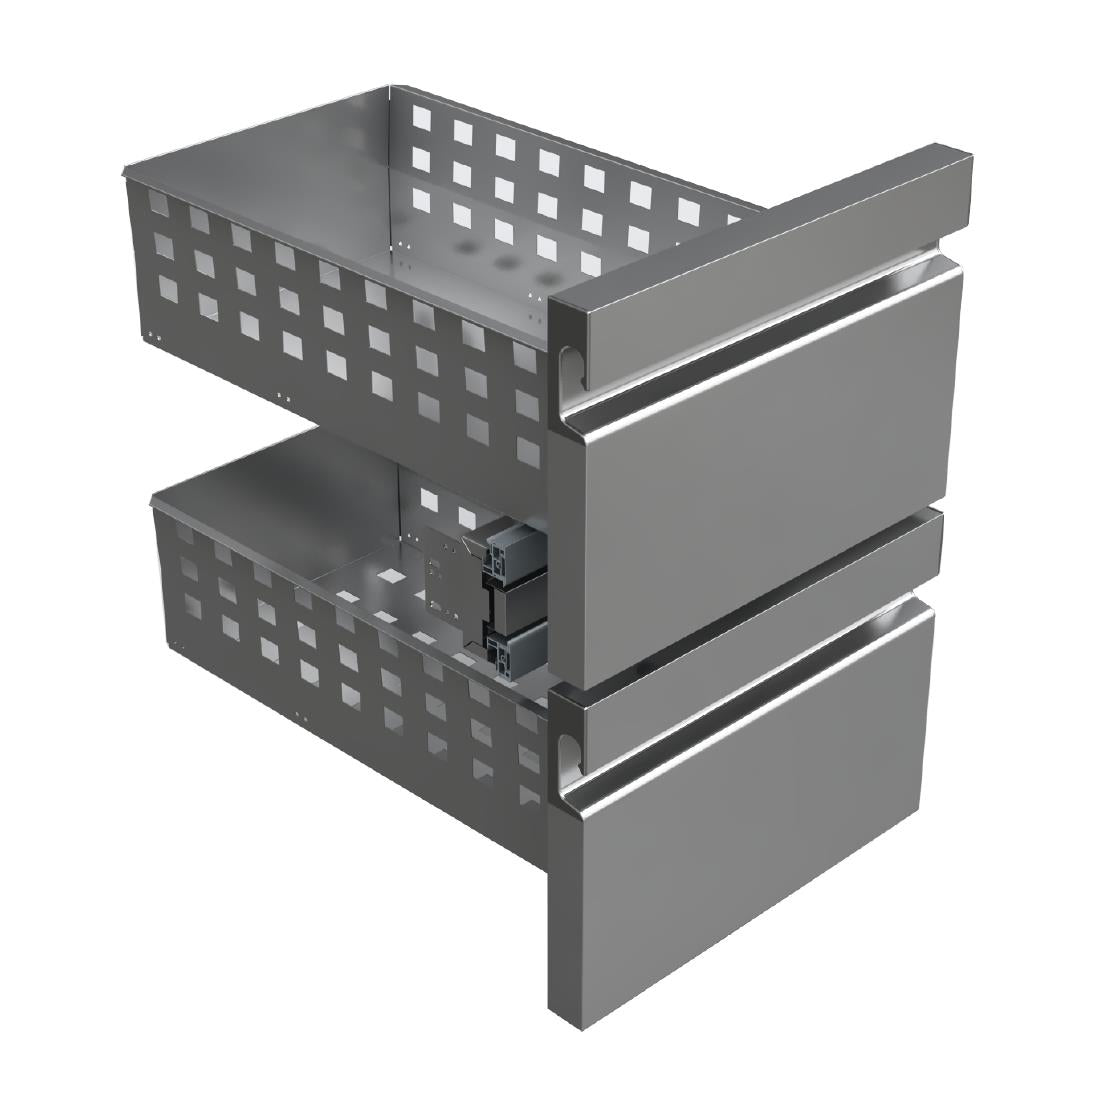 FU027 Fagor Concept Kit Drawers for Counter Units 1/2 & 1/2 Right JD Catering Equipment Solutions Ltd